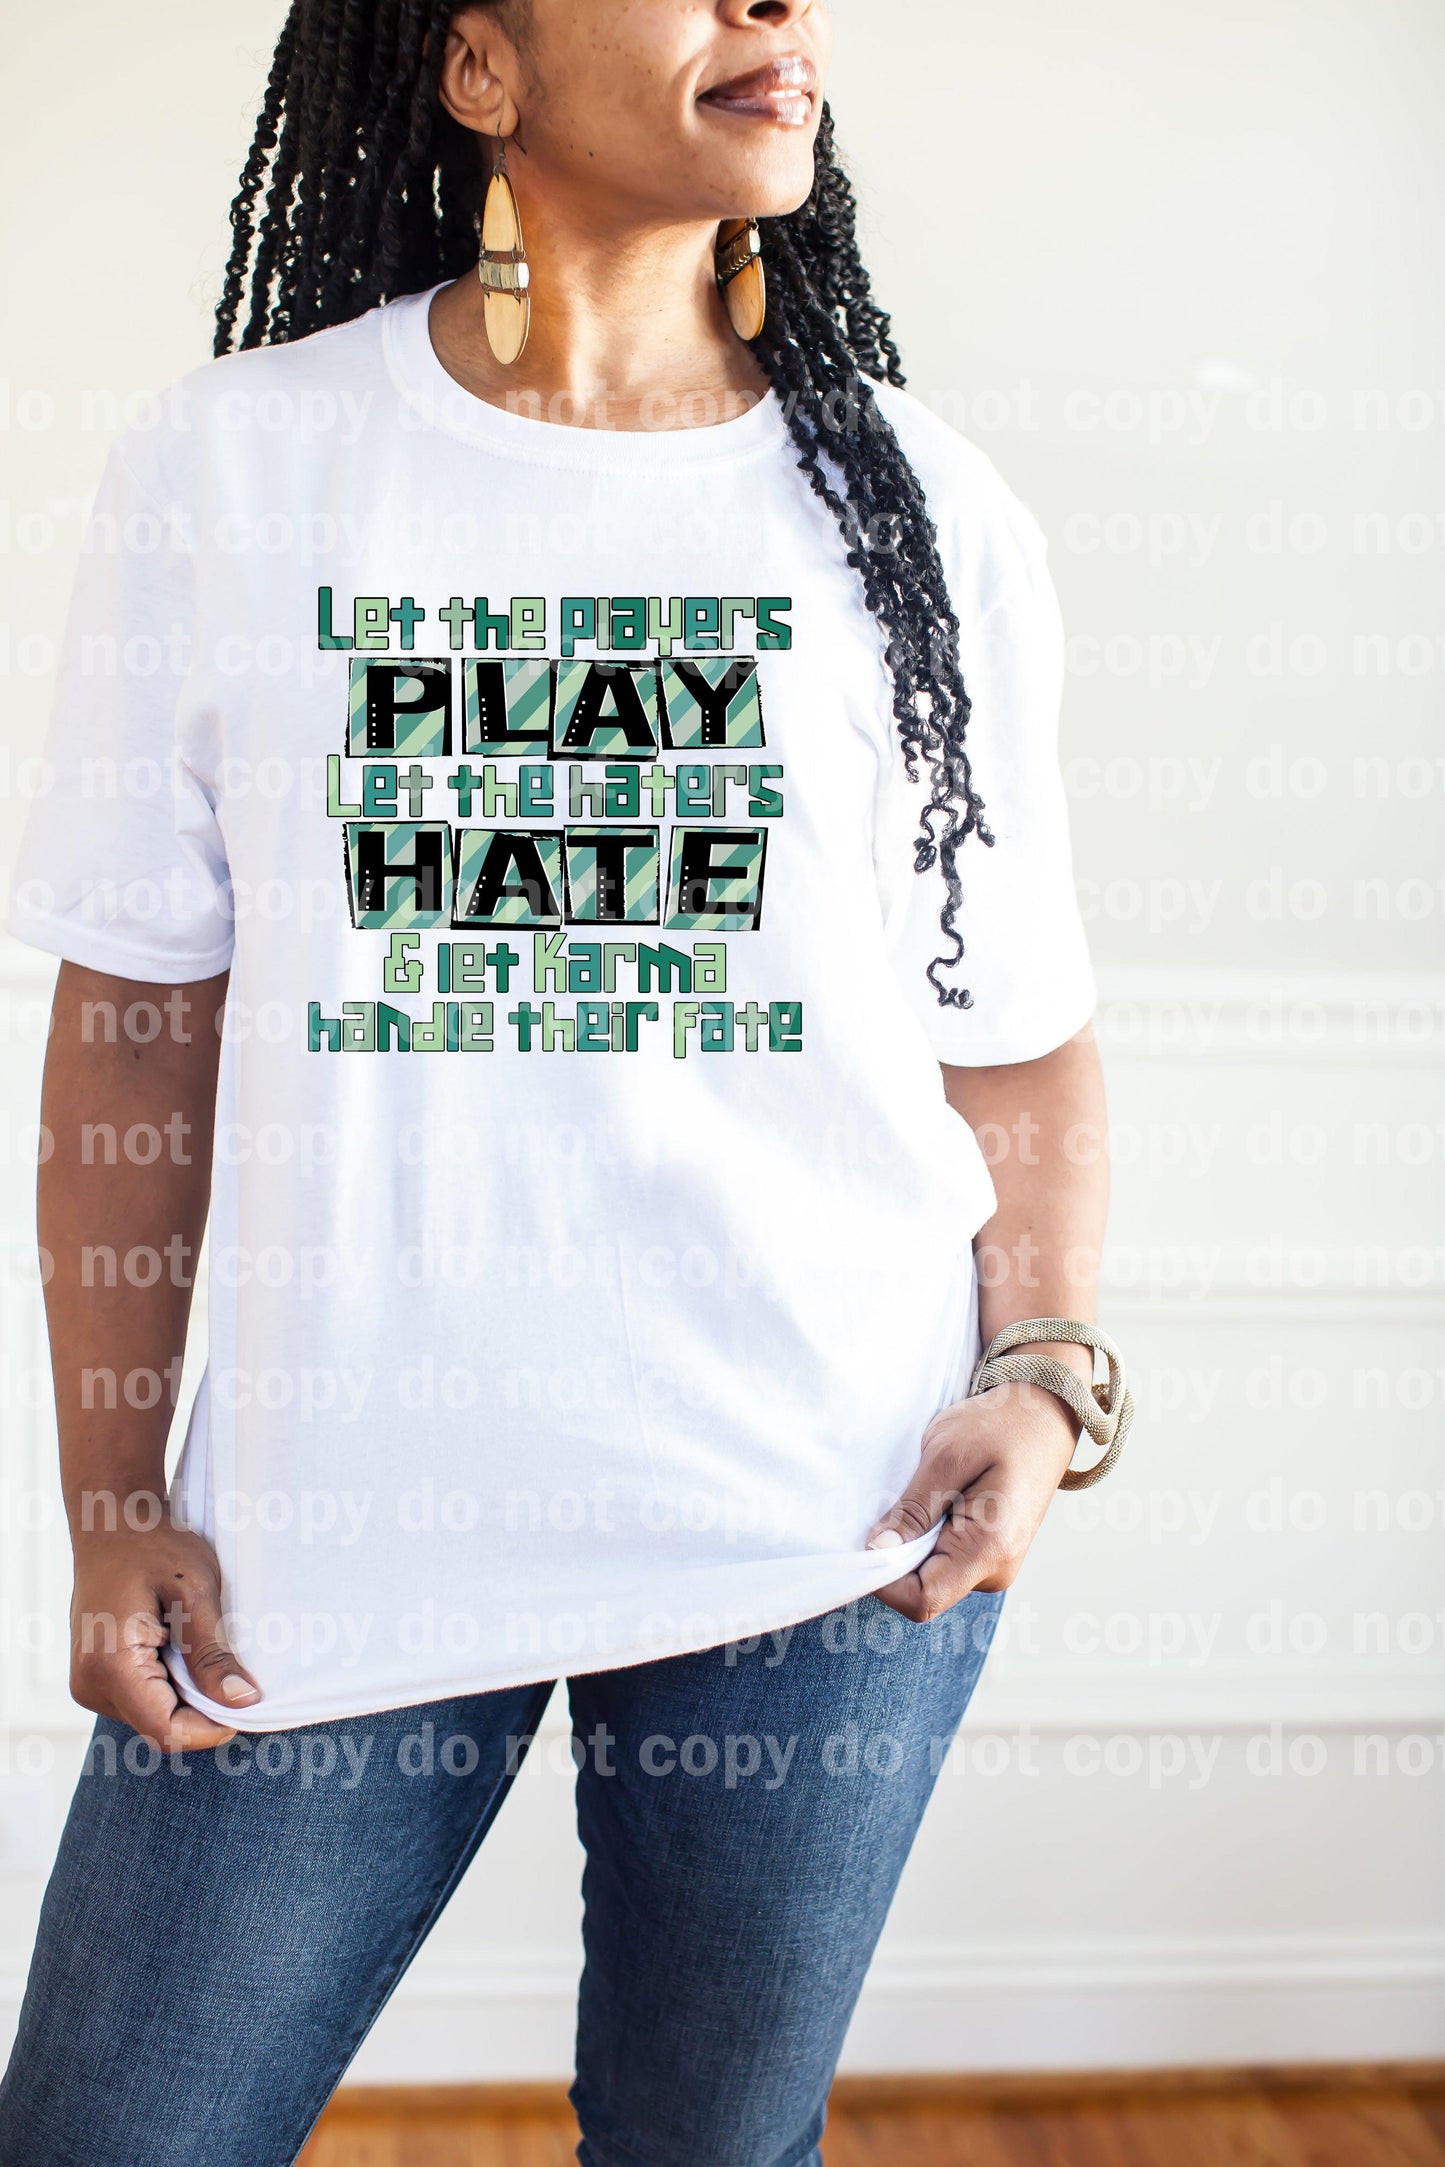 Let The Players Play Let The Haters Hate Let The Karma Handle Their Fate Dream Print or Sublimation Print